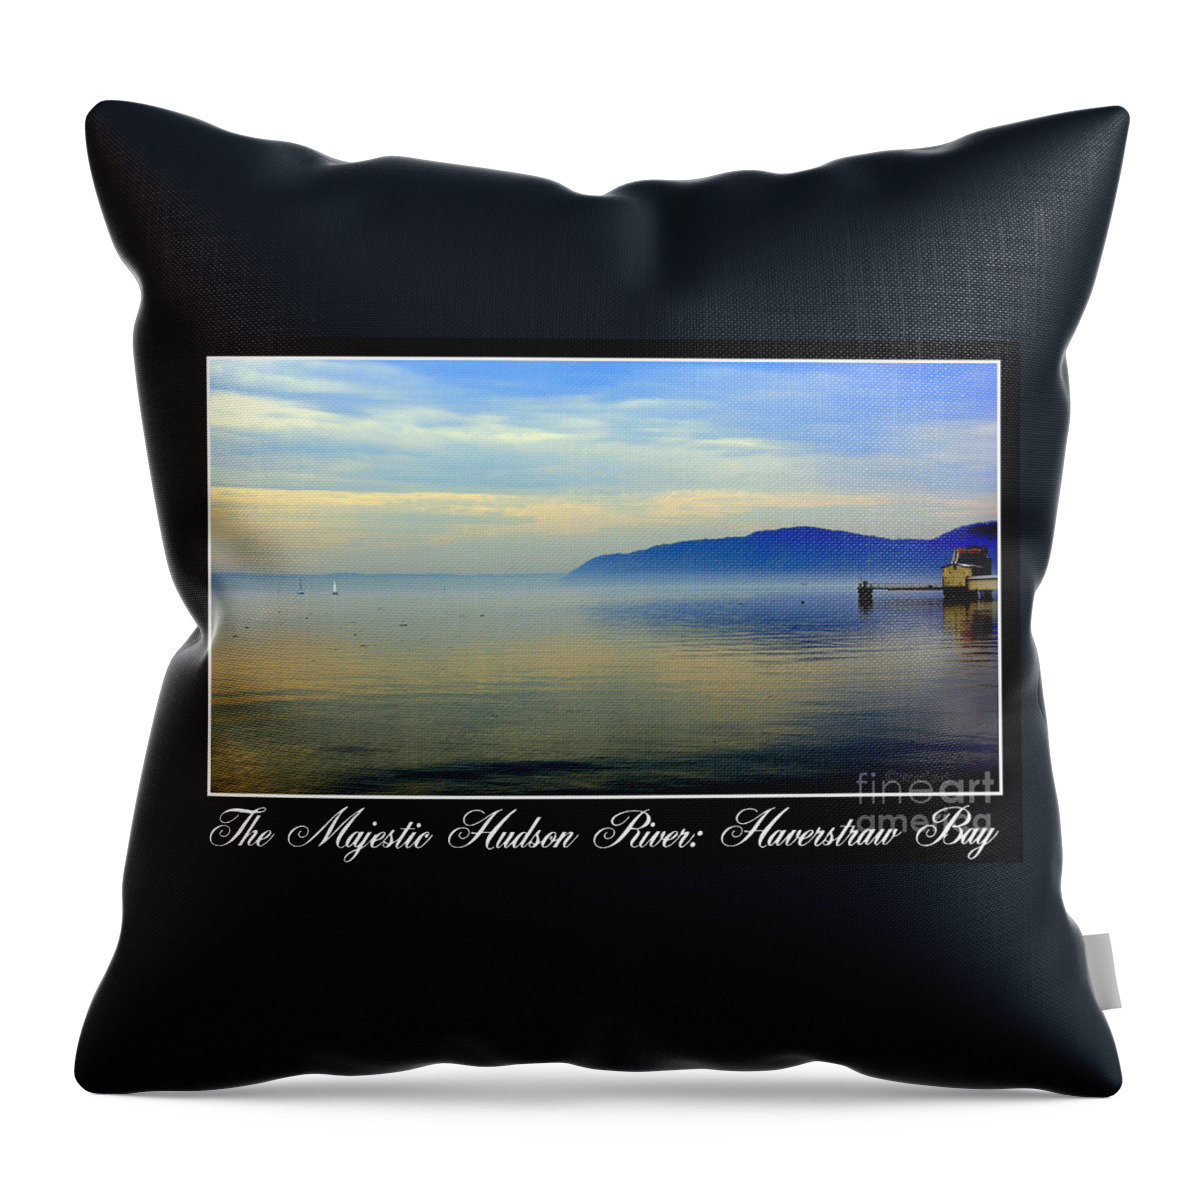 Poster Throw Pillow featuring the photograph Hudson River Haverstraw Bay by Poster by Irene Czys